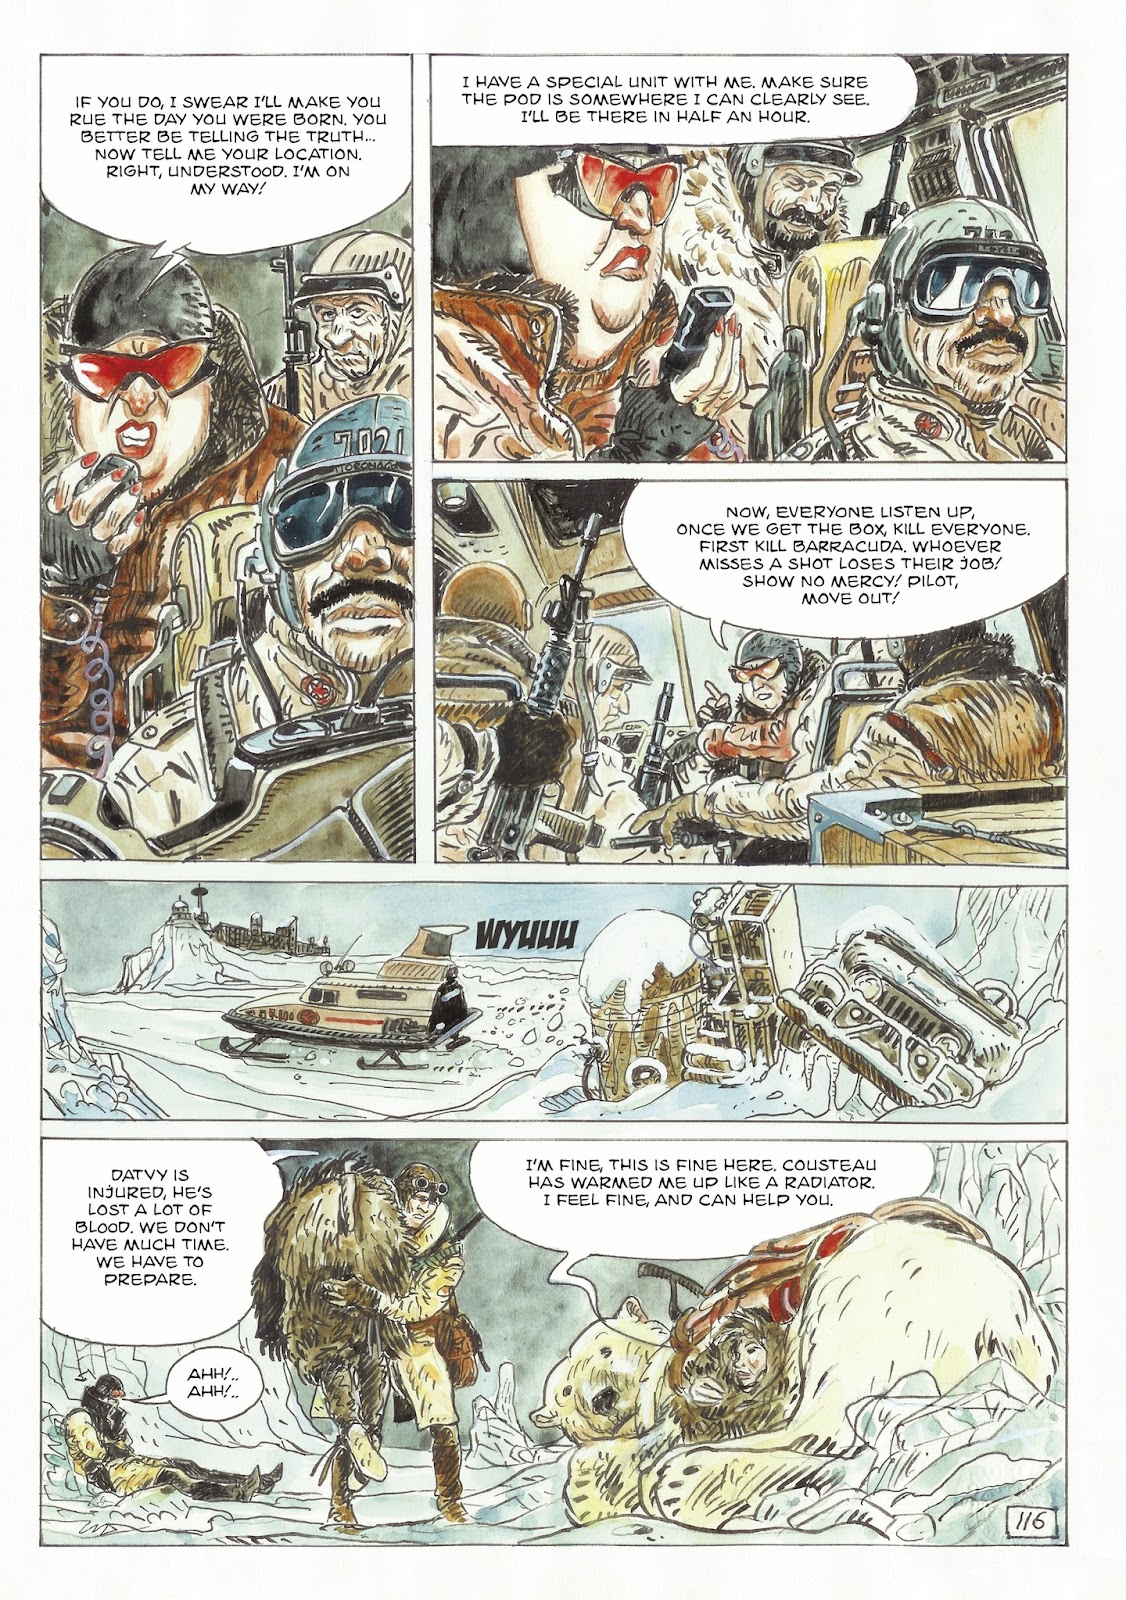 The Man With the Bear issue 2 - Page 62